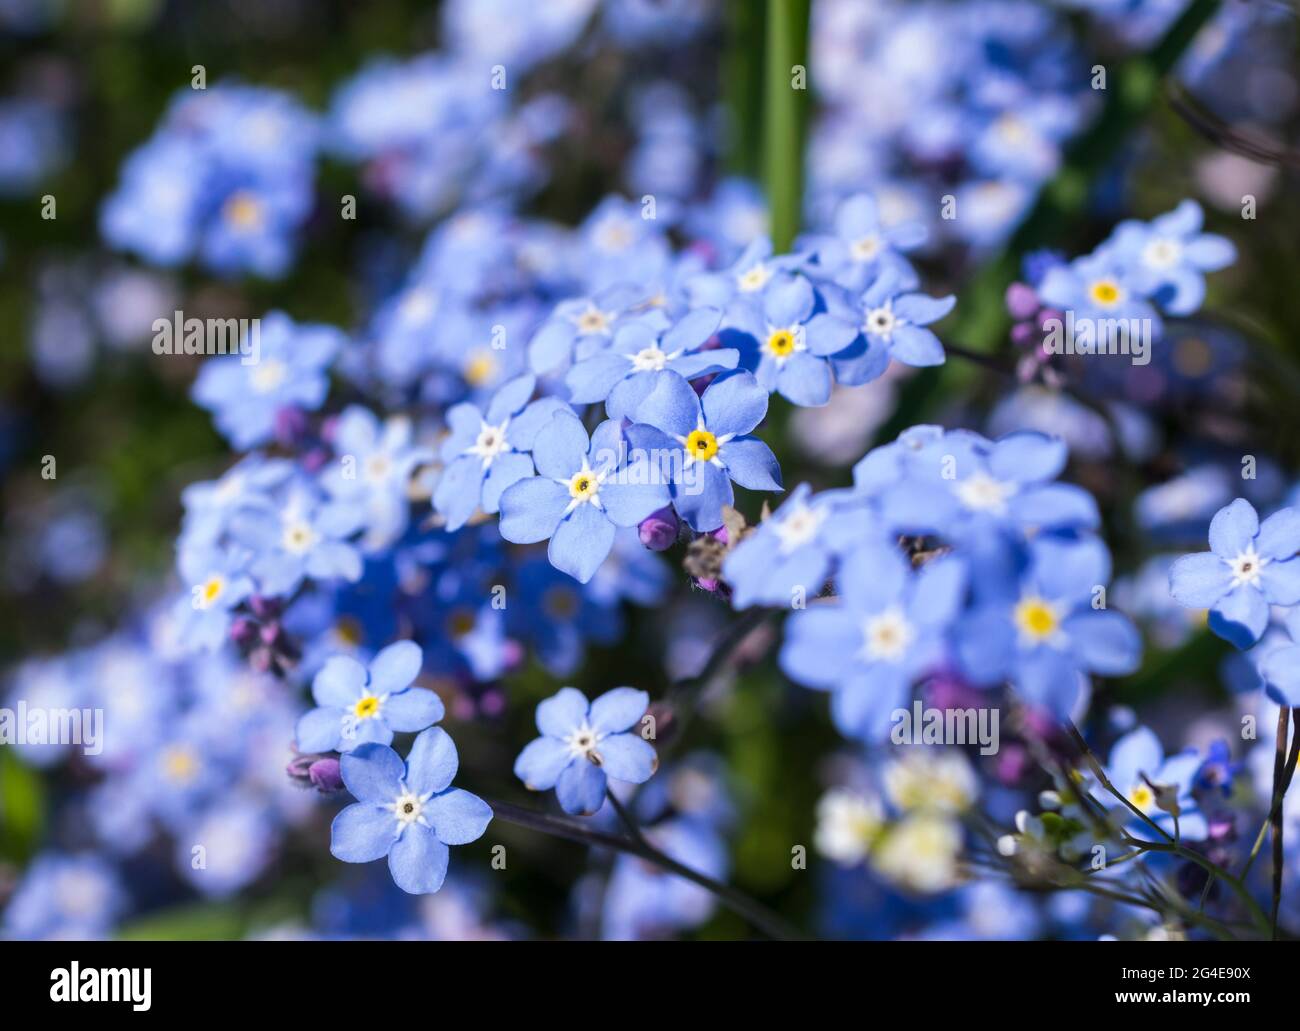 A cluster of Forget-me-nots (Myosotis sylvatica 'Indigo') in a garden in England, UK in May. Stock Photo